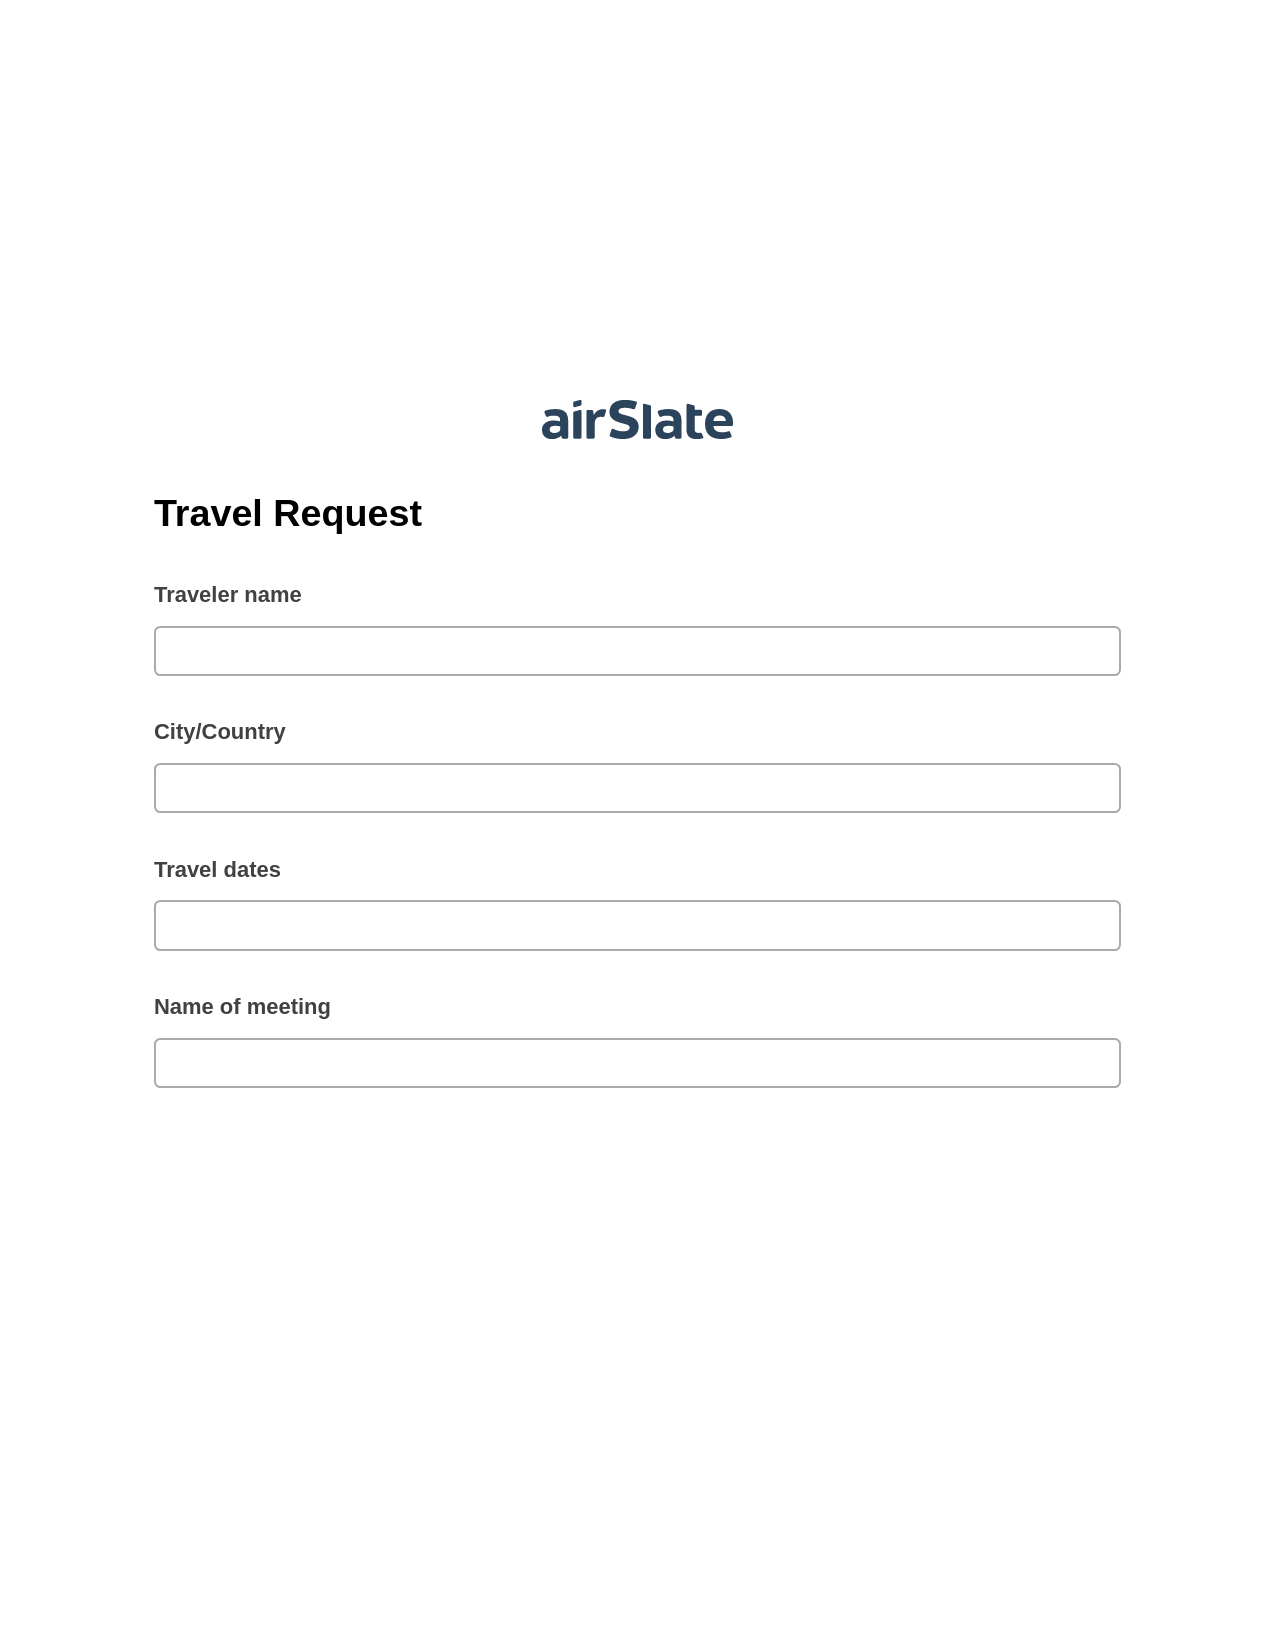 Travel Request Pre-fill Dropdowns from Excel Bot, Create slate addon, Archive to SharePoint Folder Bot